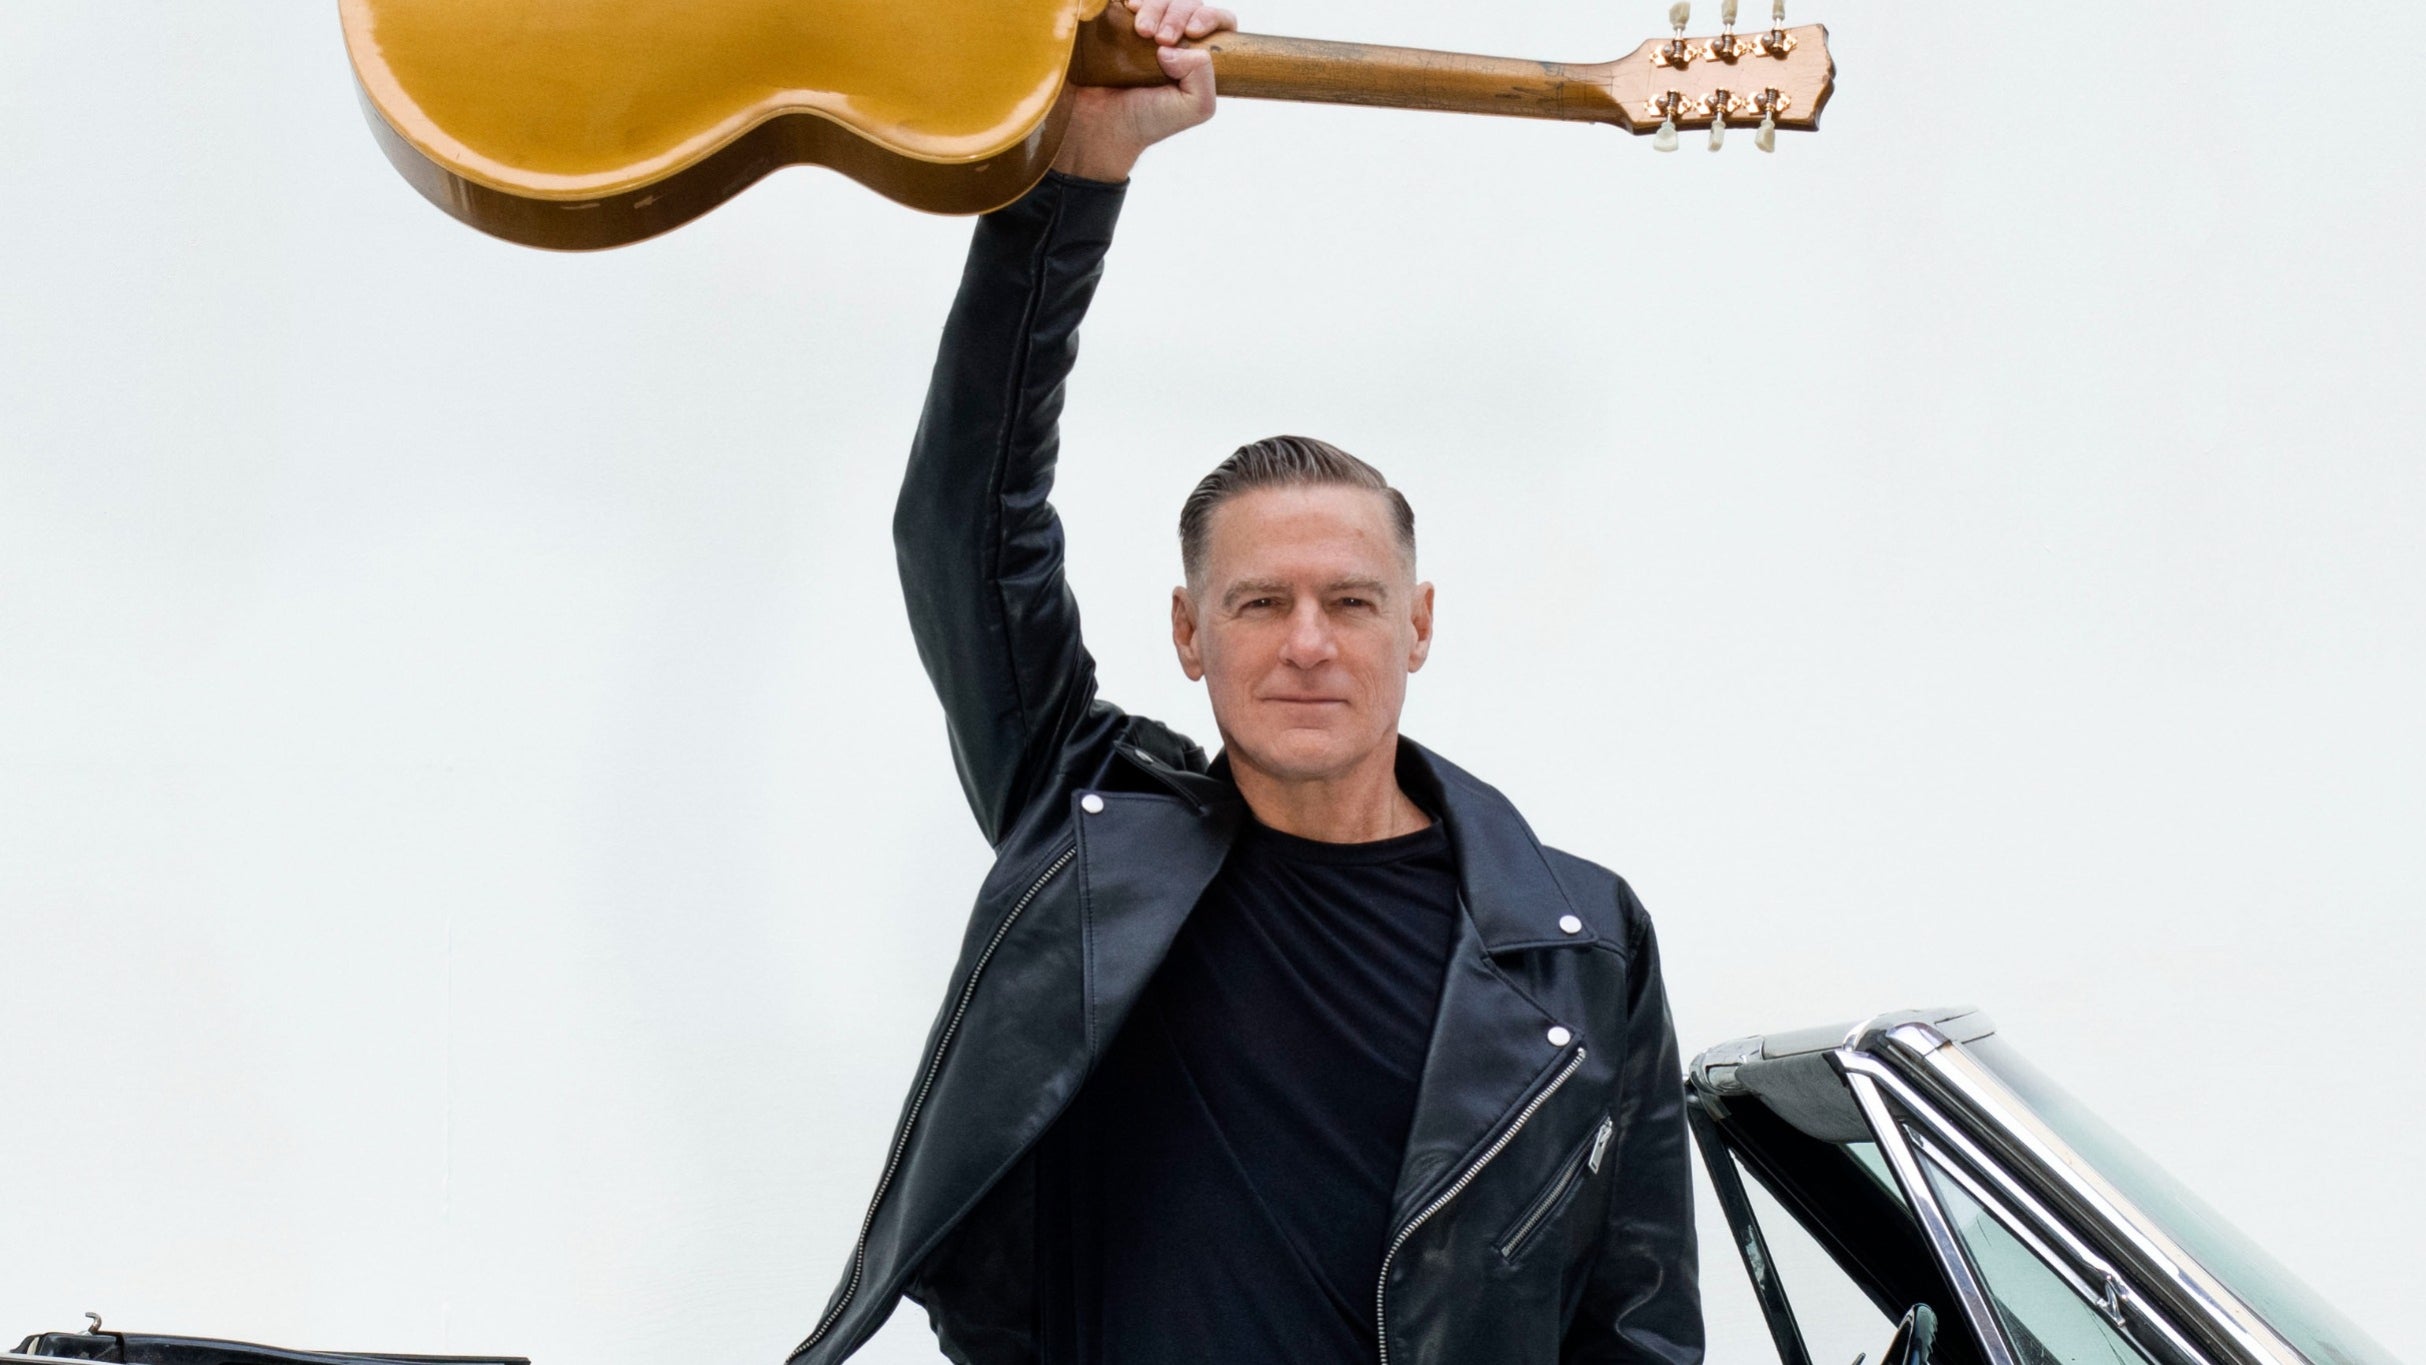 Bryan Adams free pre-sale code for concert tickets in Pickering, ON (The Arena at Pickering Casino Resort)